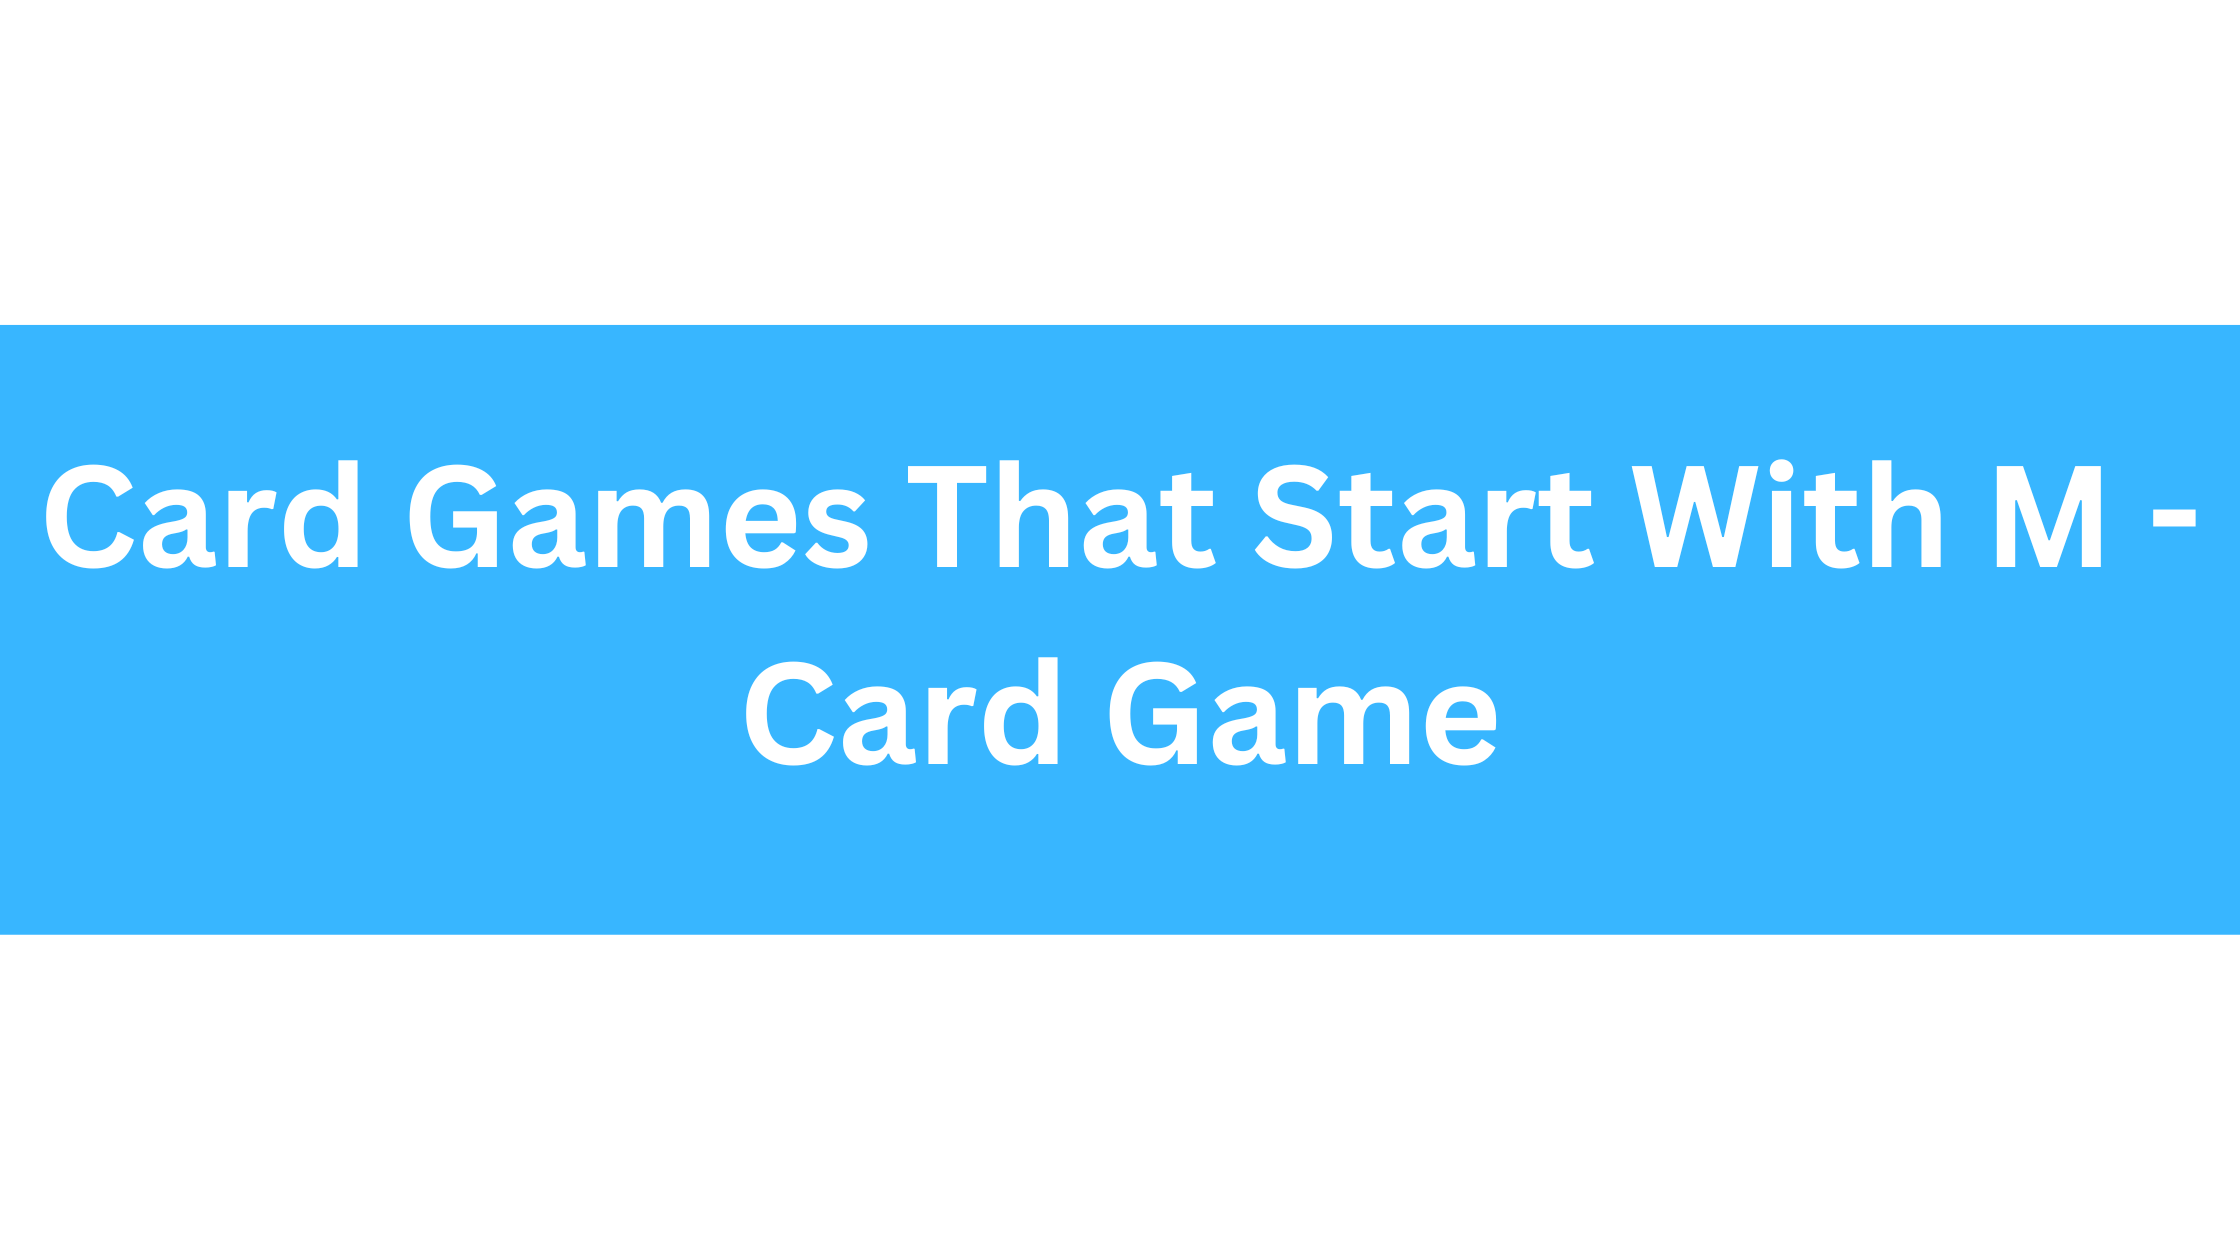 Card Games That Start With M